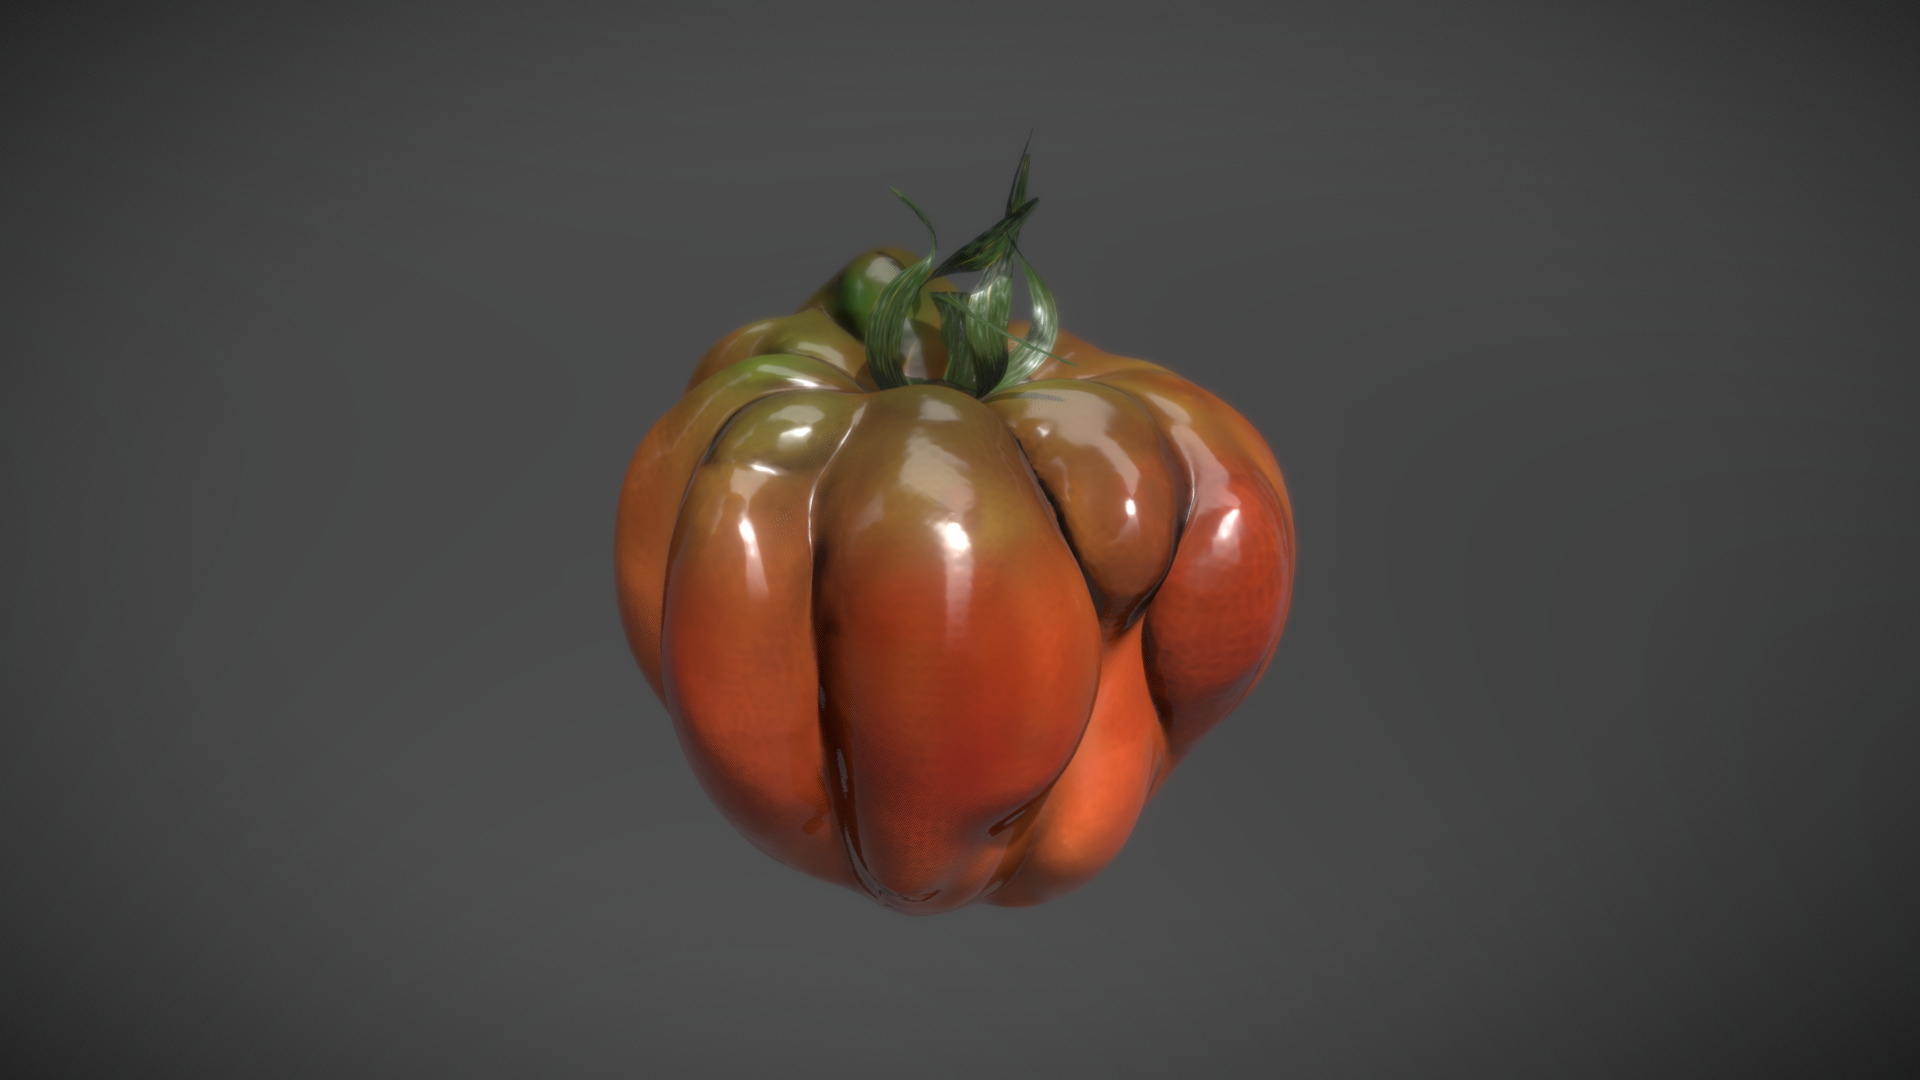 3D model Tomato - This is a 3D model of the Tomato. The 3D model is about a close-up of a tomato.